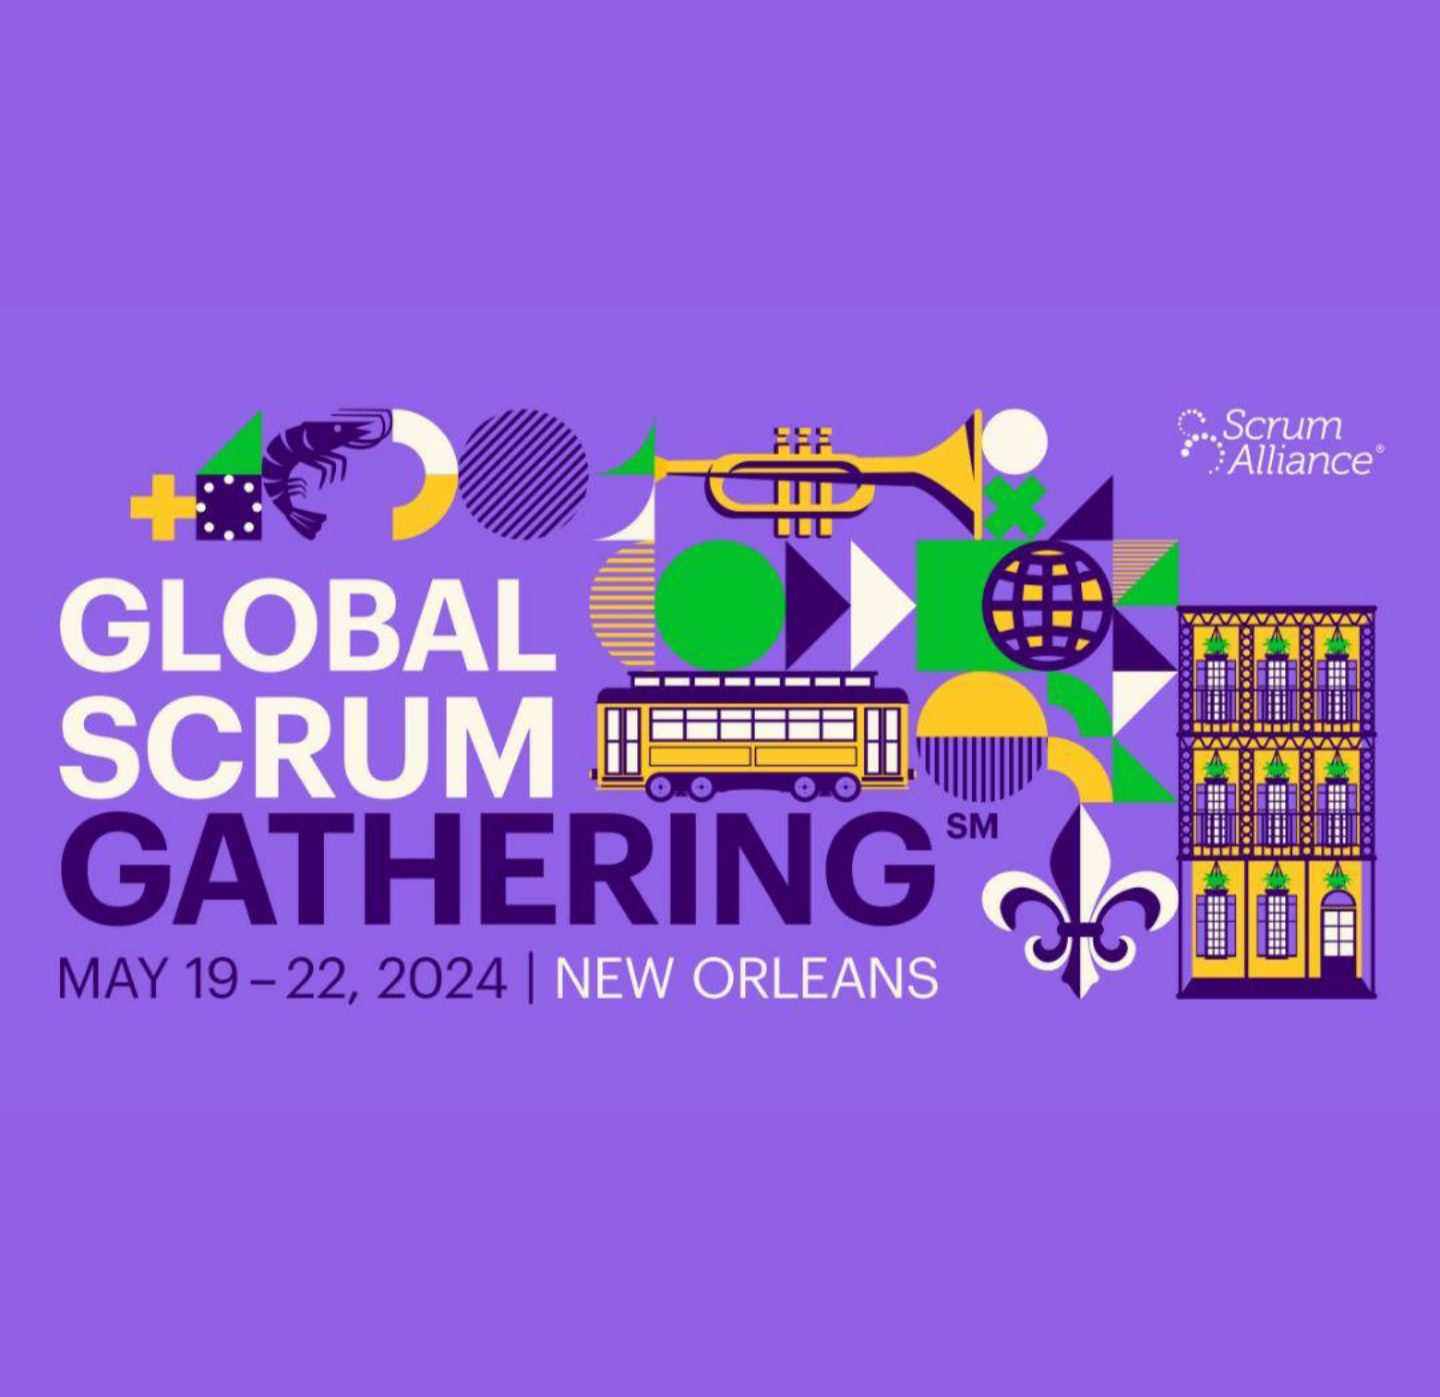 Global Scrum Gathering 2024 – New Orleans